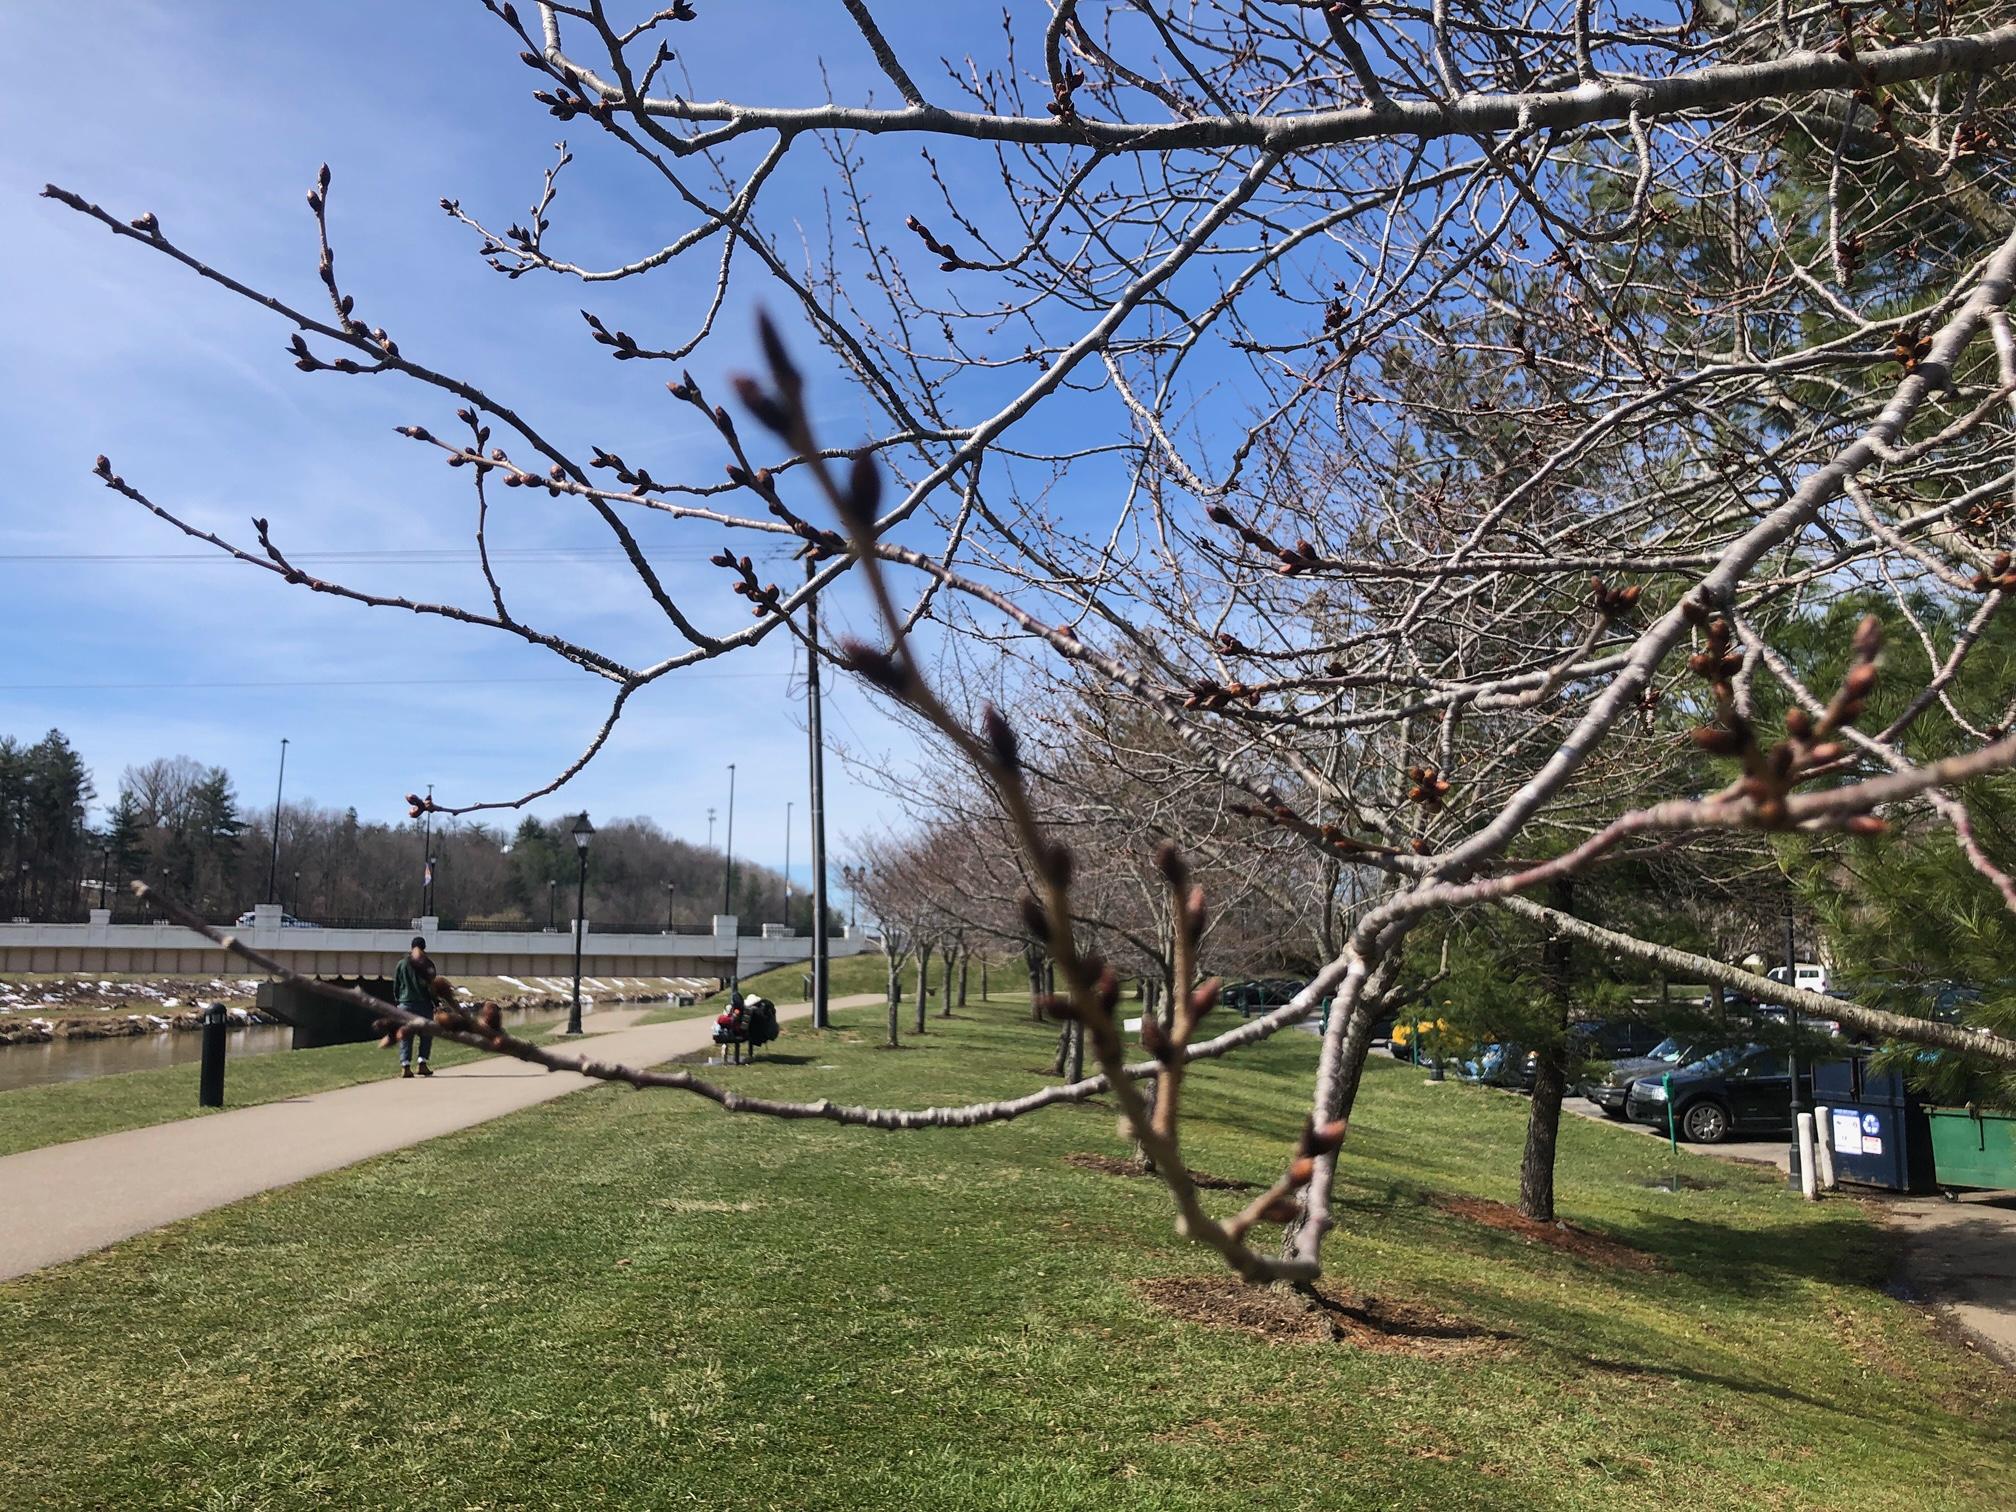 Buds on the cherry tree starting to swell along the bike path